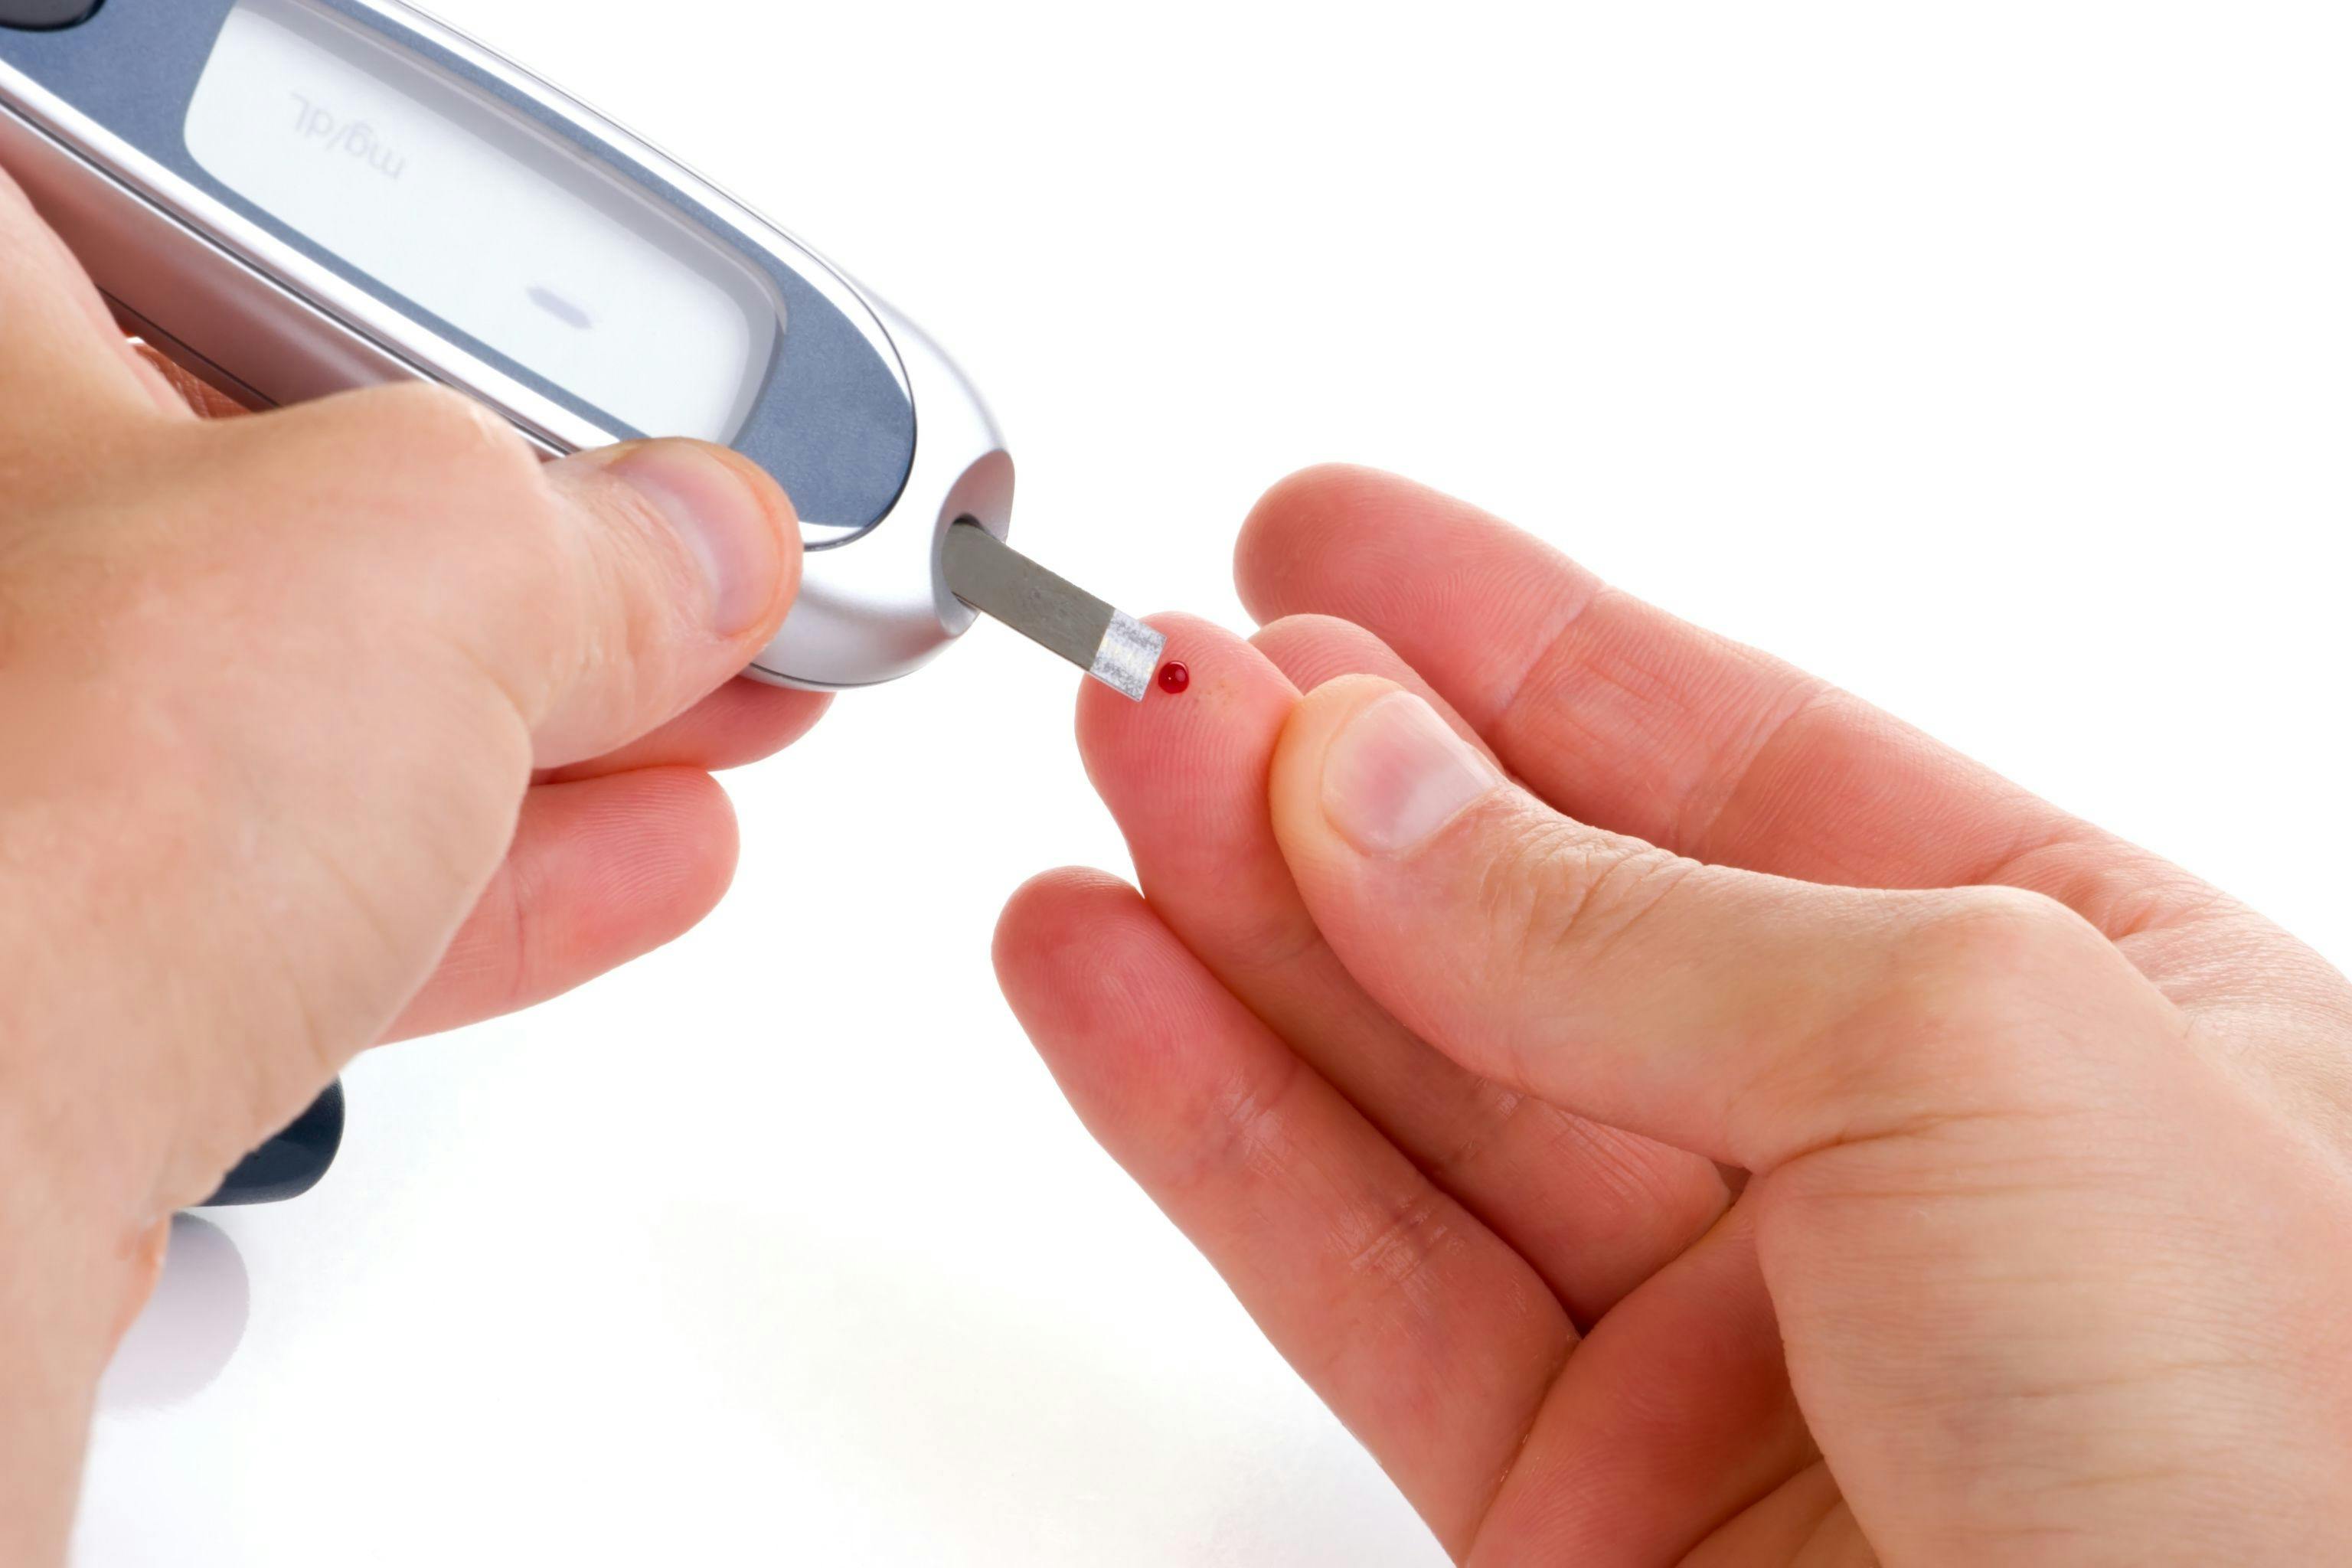 Study: Intermittent Fasting Shows Link to Diabetes Remission